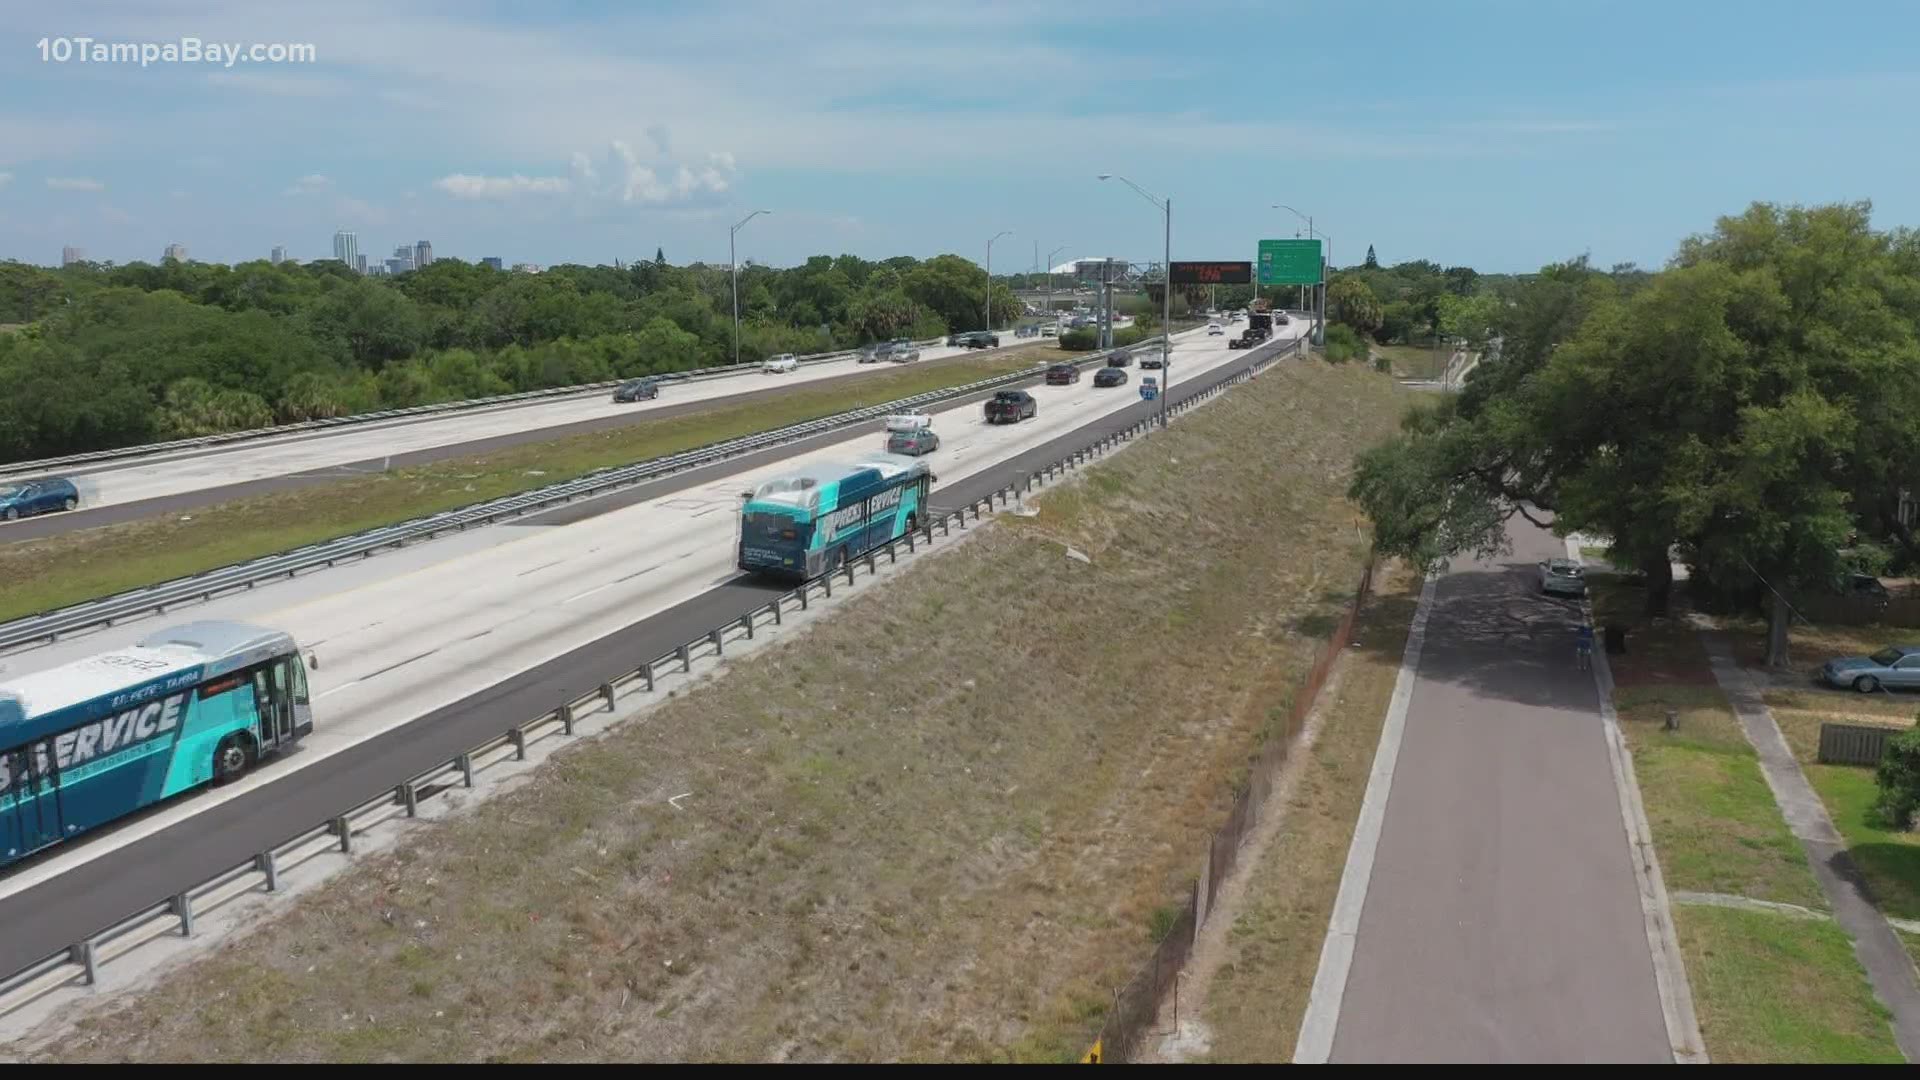 The Bus-on-Shoulder project includes newly widened and hardened shoulders on northbound and southbound I-275.